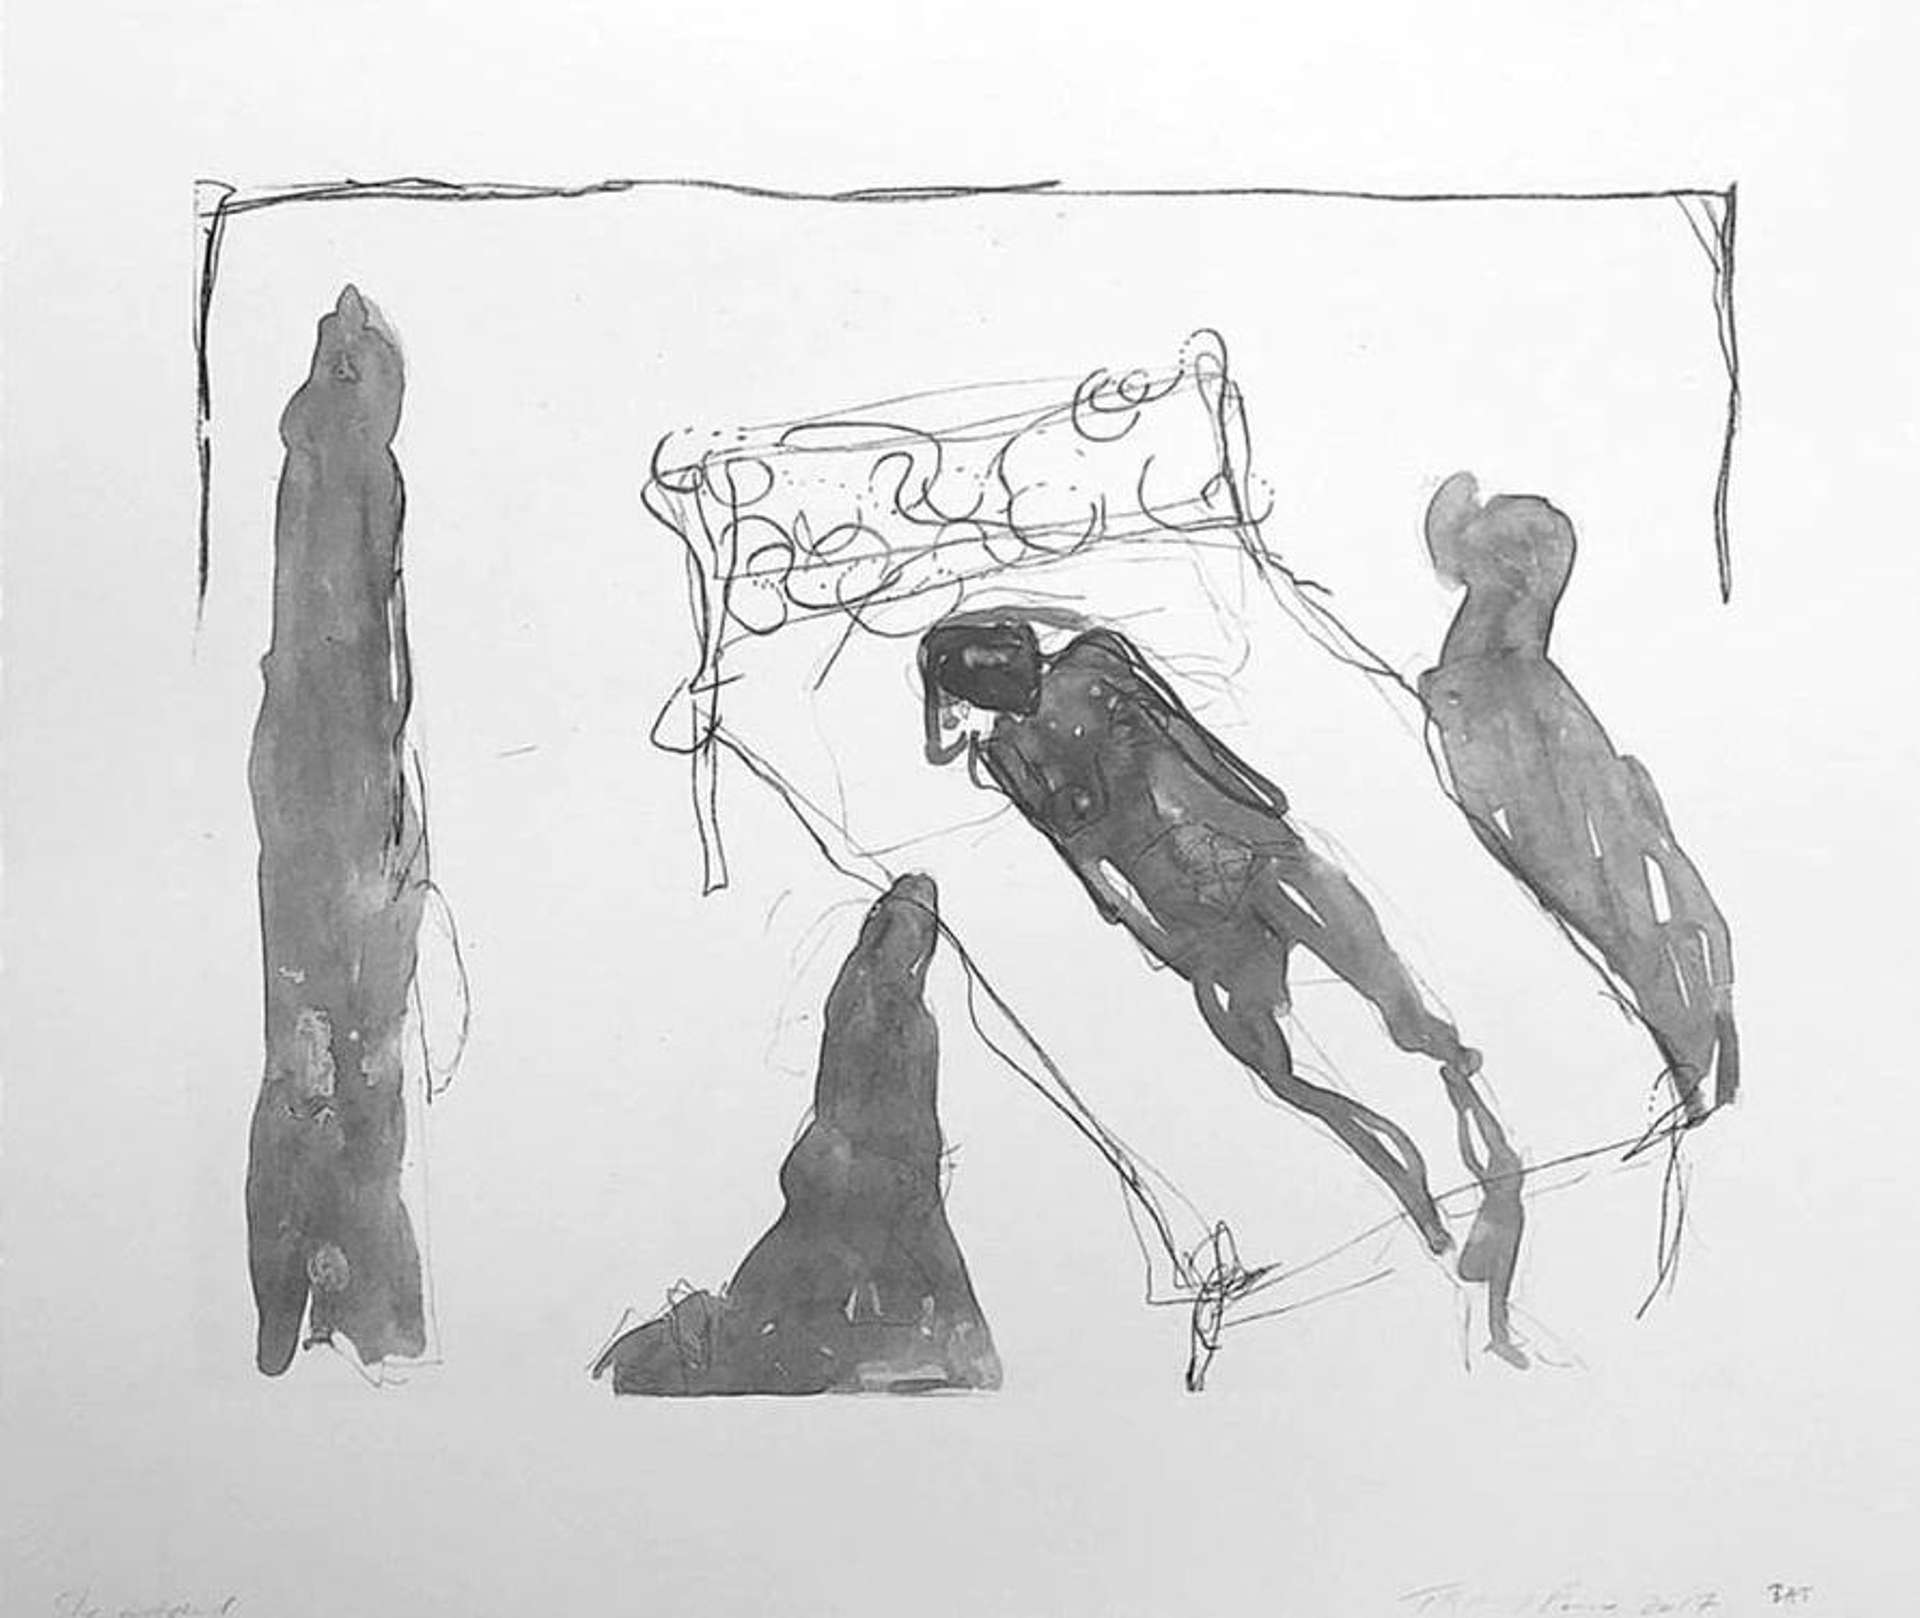 Tracey Emin: She Watched - Signed Print